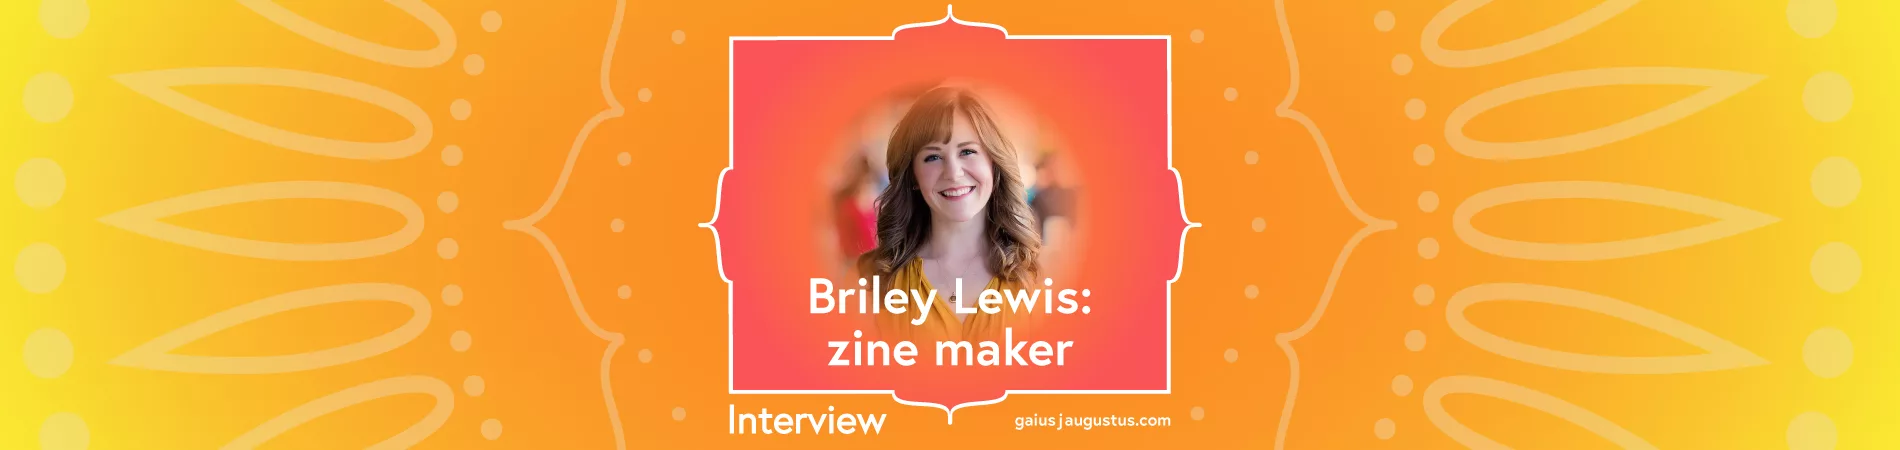 Image Cover 2019 Interview 01 Briley Lewis